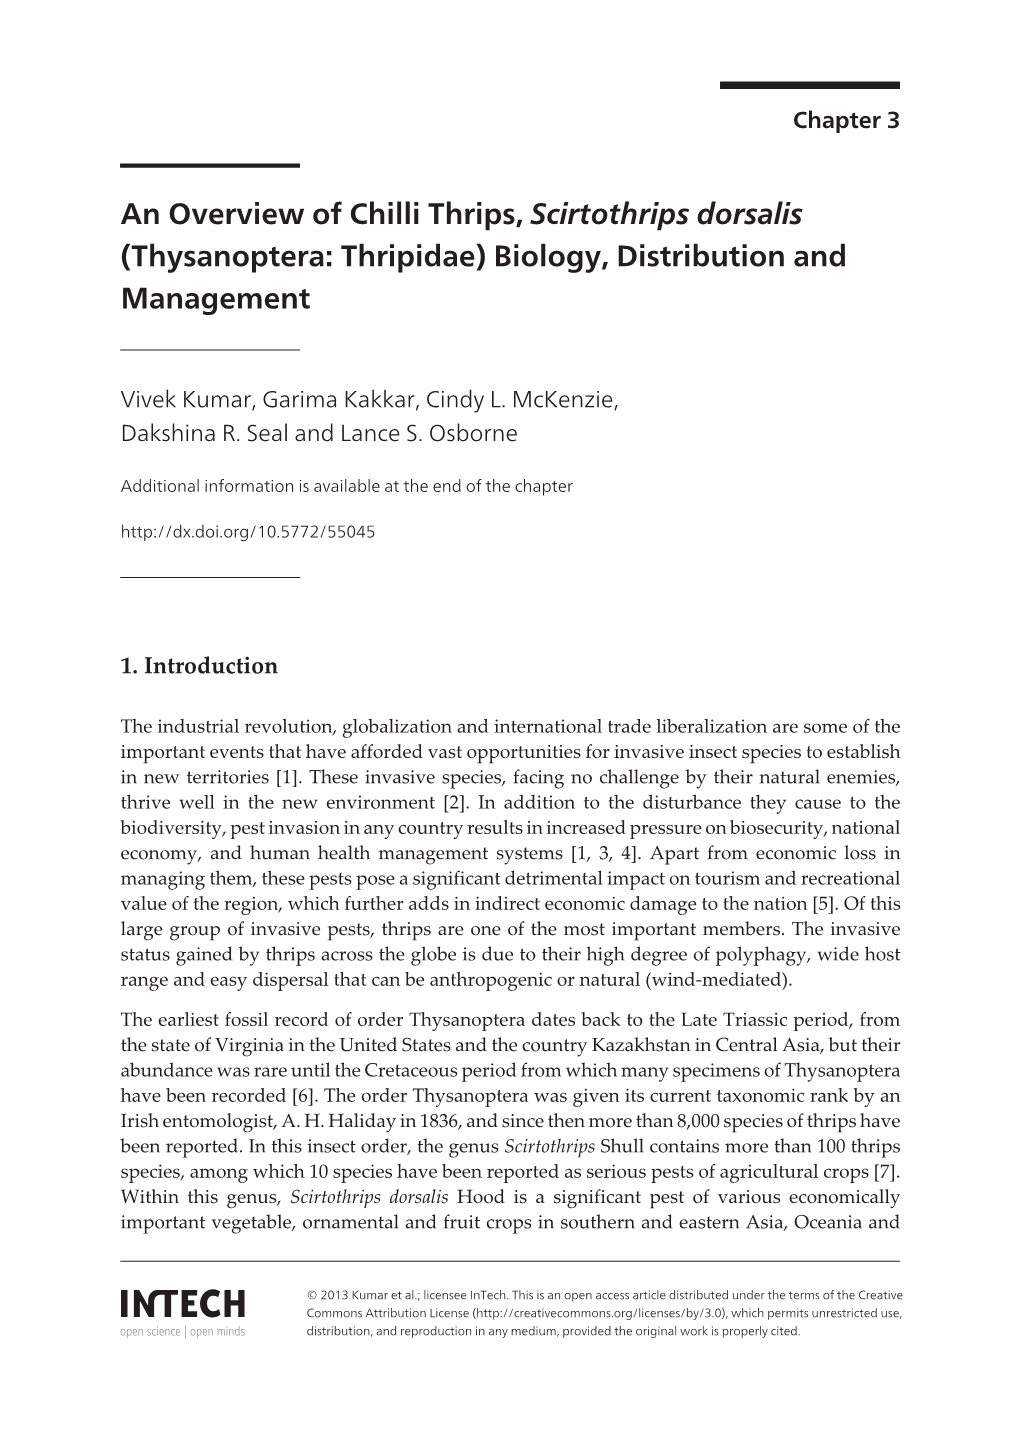 An Overview of Chilli Thrips, Scirtothrips Dorsalis (Thysanoptera: Thripidae) Biology, Distribution and Management